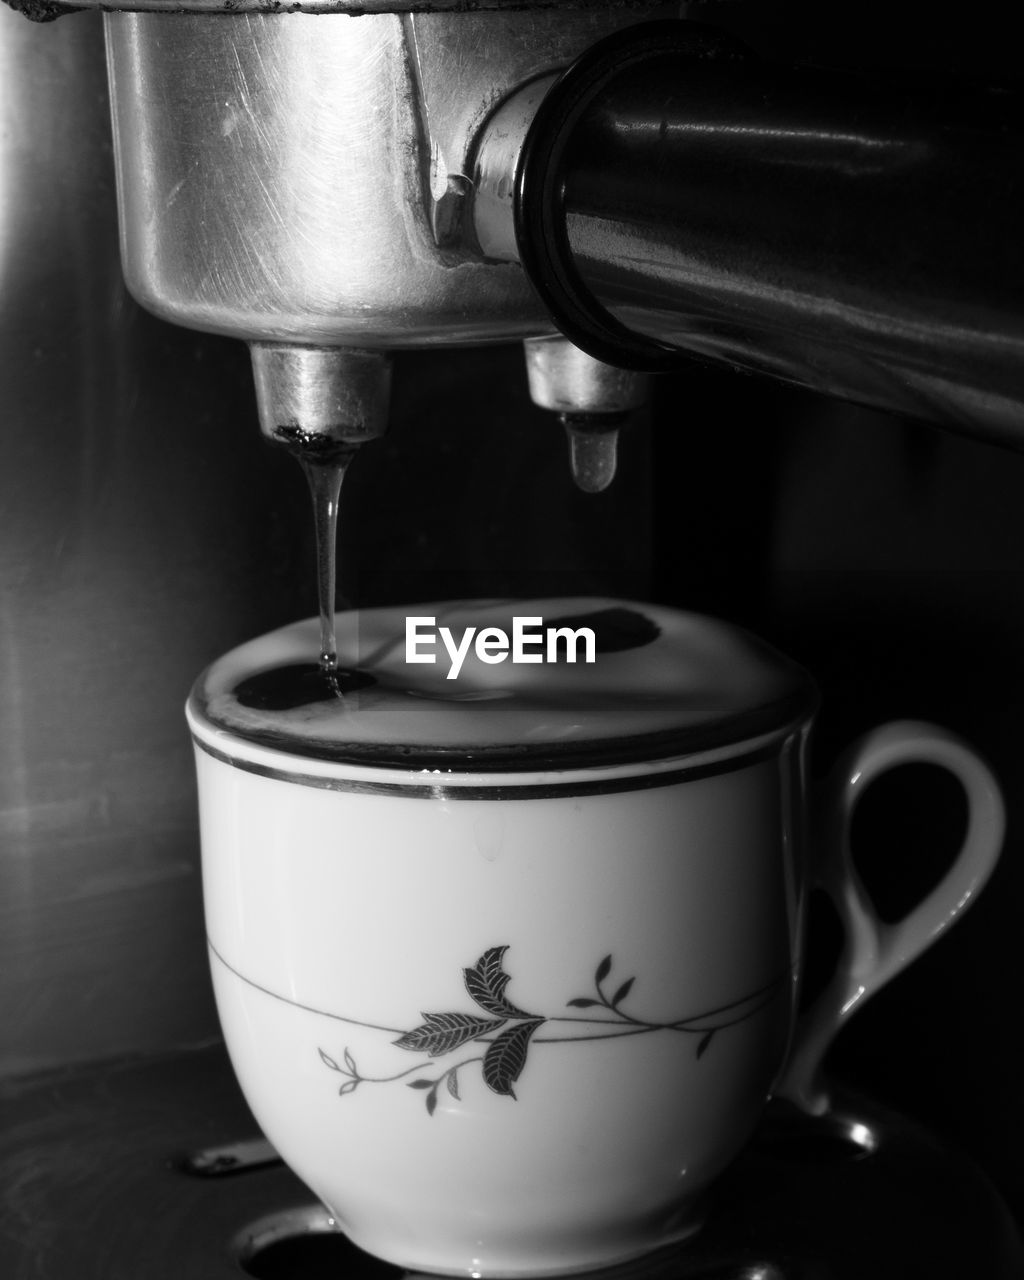 coffee, cup, food and drink, drink, coffee cup, indoors, mug, small appliance, refreshment, hot drink, home appliance, espresso machine, black and white, coffeemaker, tableware, close-up, food, no people, still life photography, pouring, kitchen appliance, appliance, monochrome photography